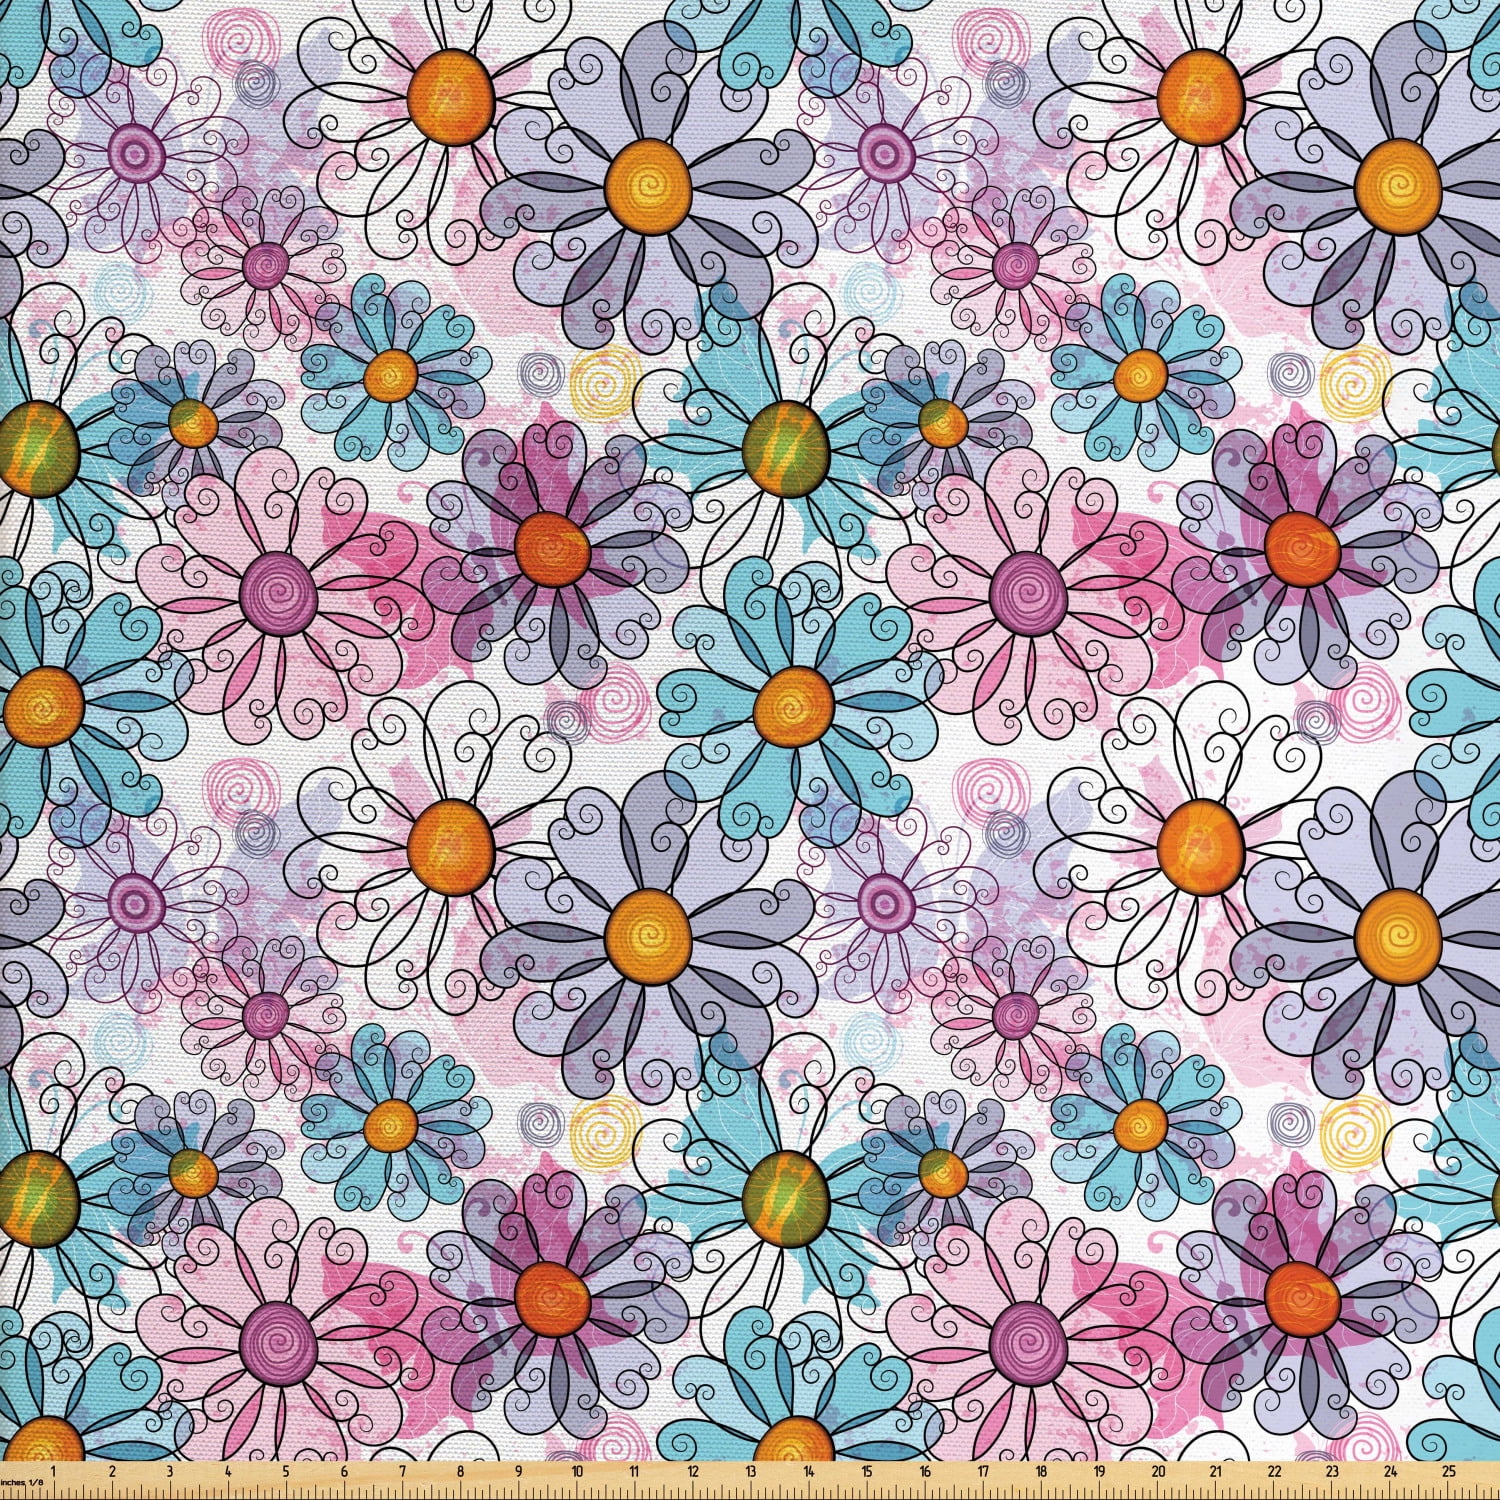 Flower Fabric by The Yard, Retro Spring Floral Pattern Grunge Funky